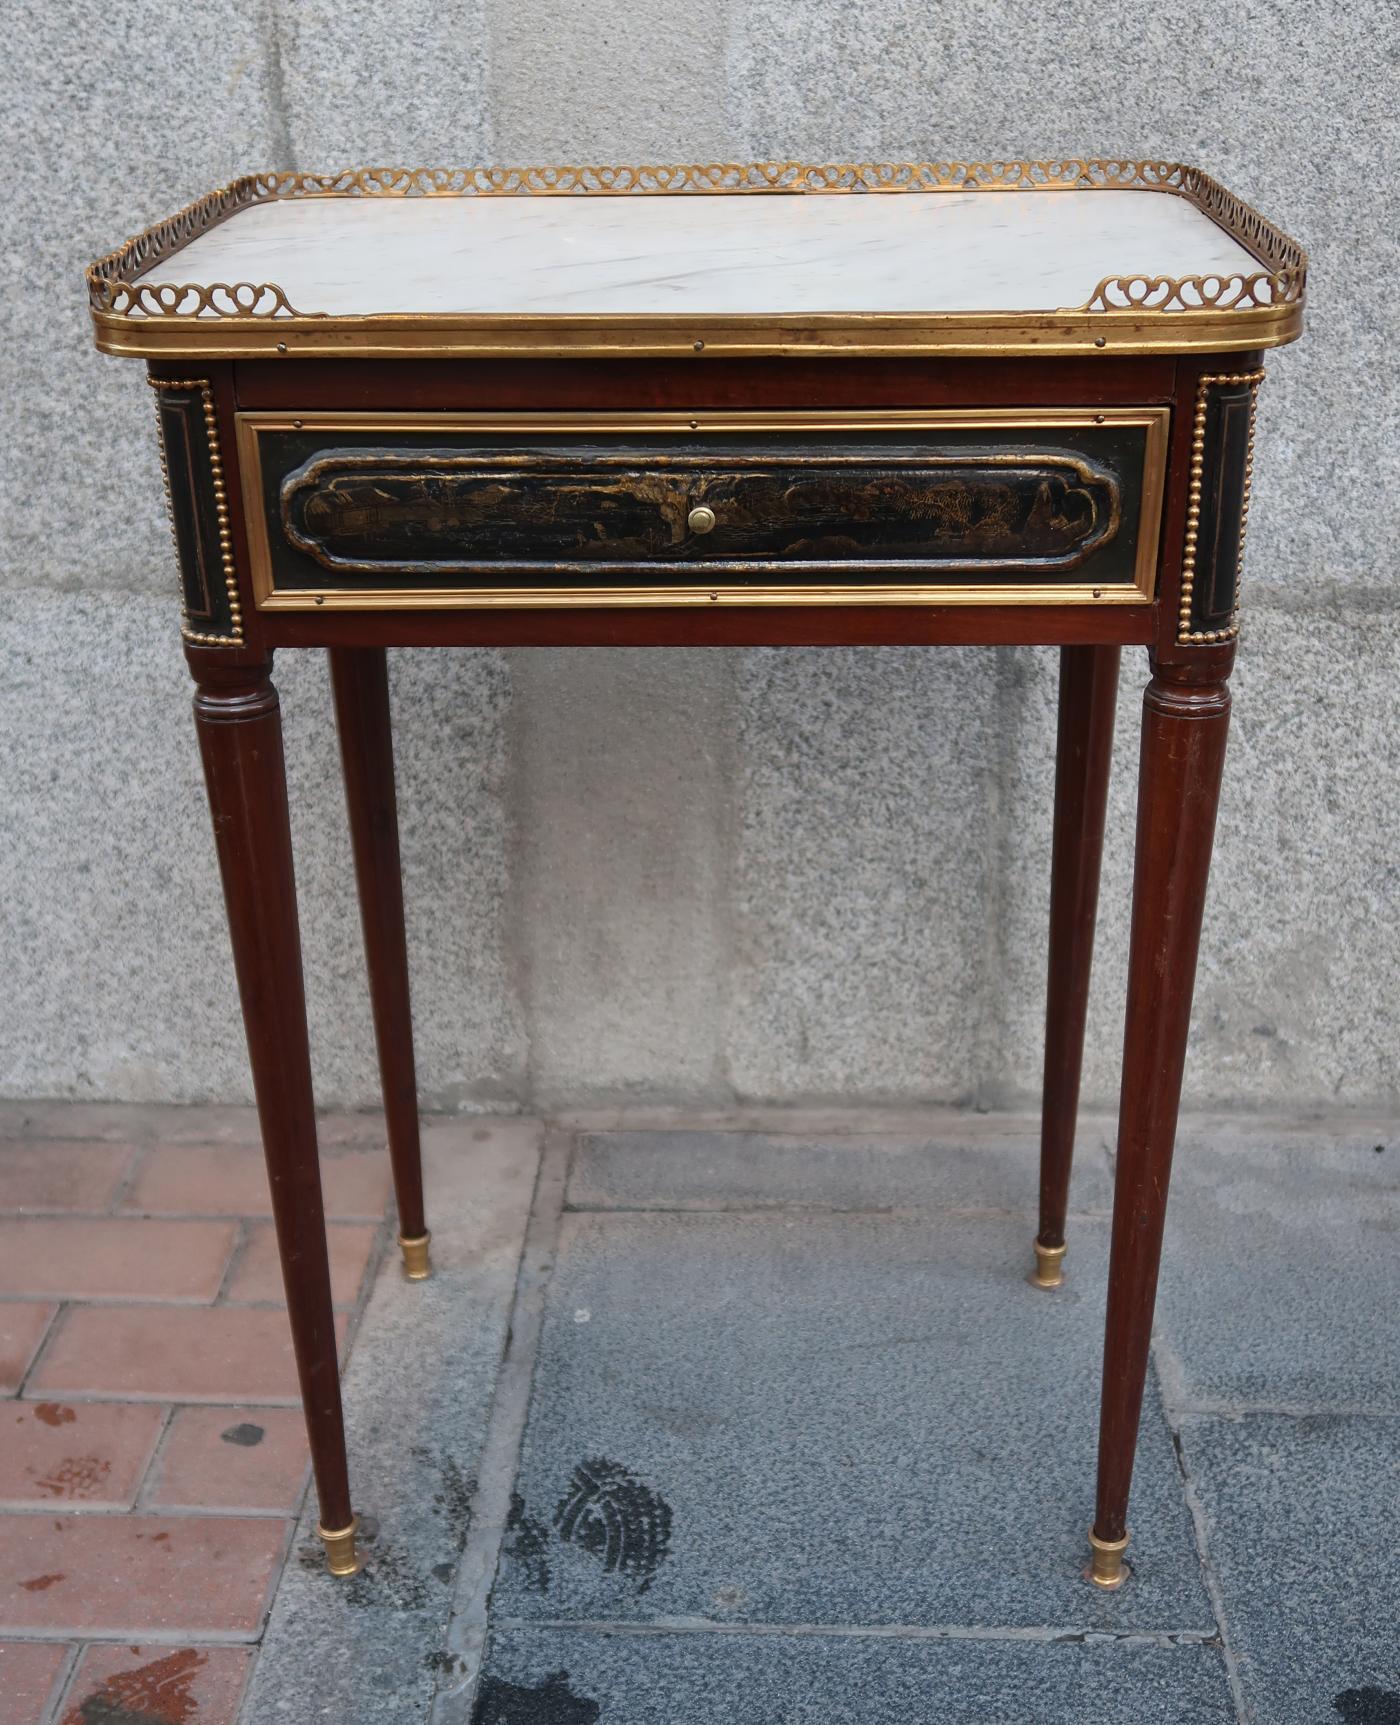 A Louis XVI mahogany, brass and marble signed table, France, 18th century.